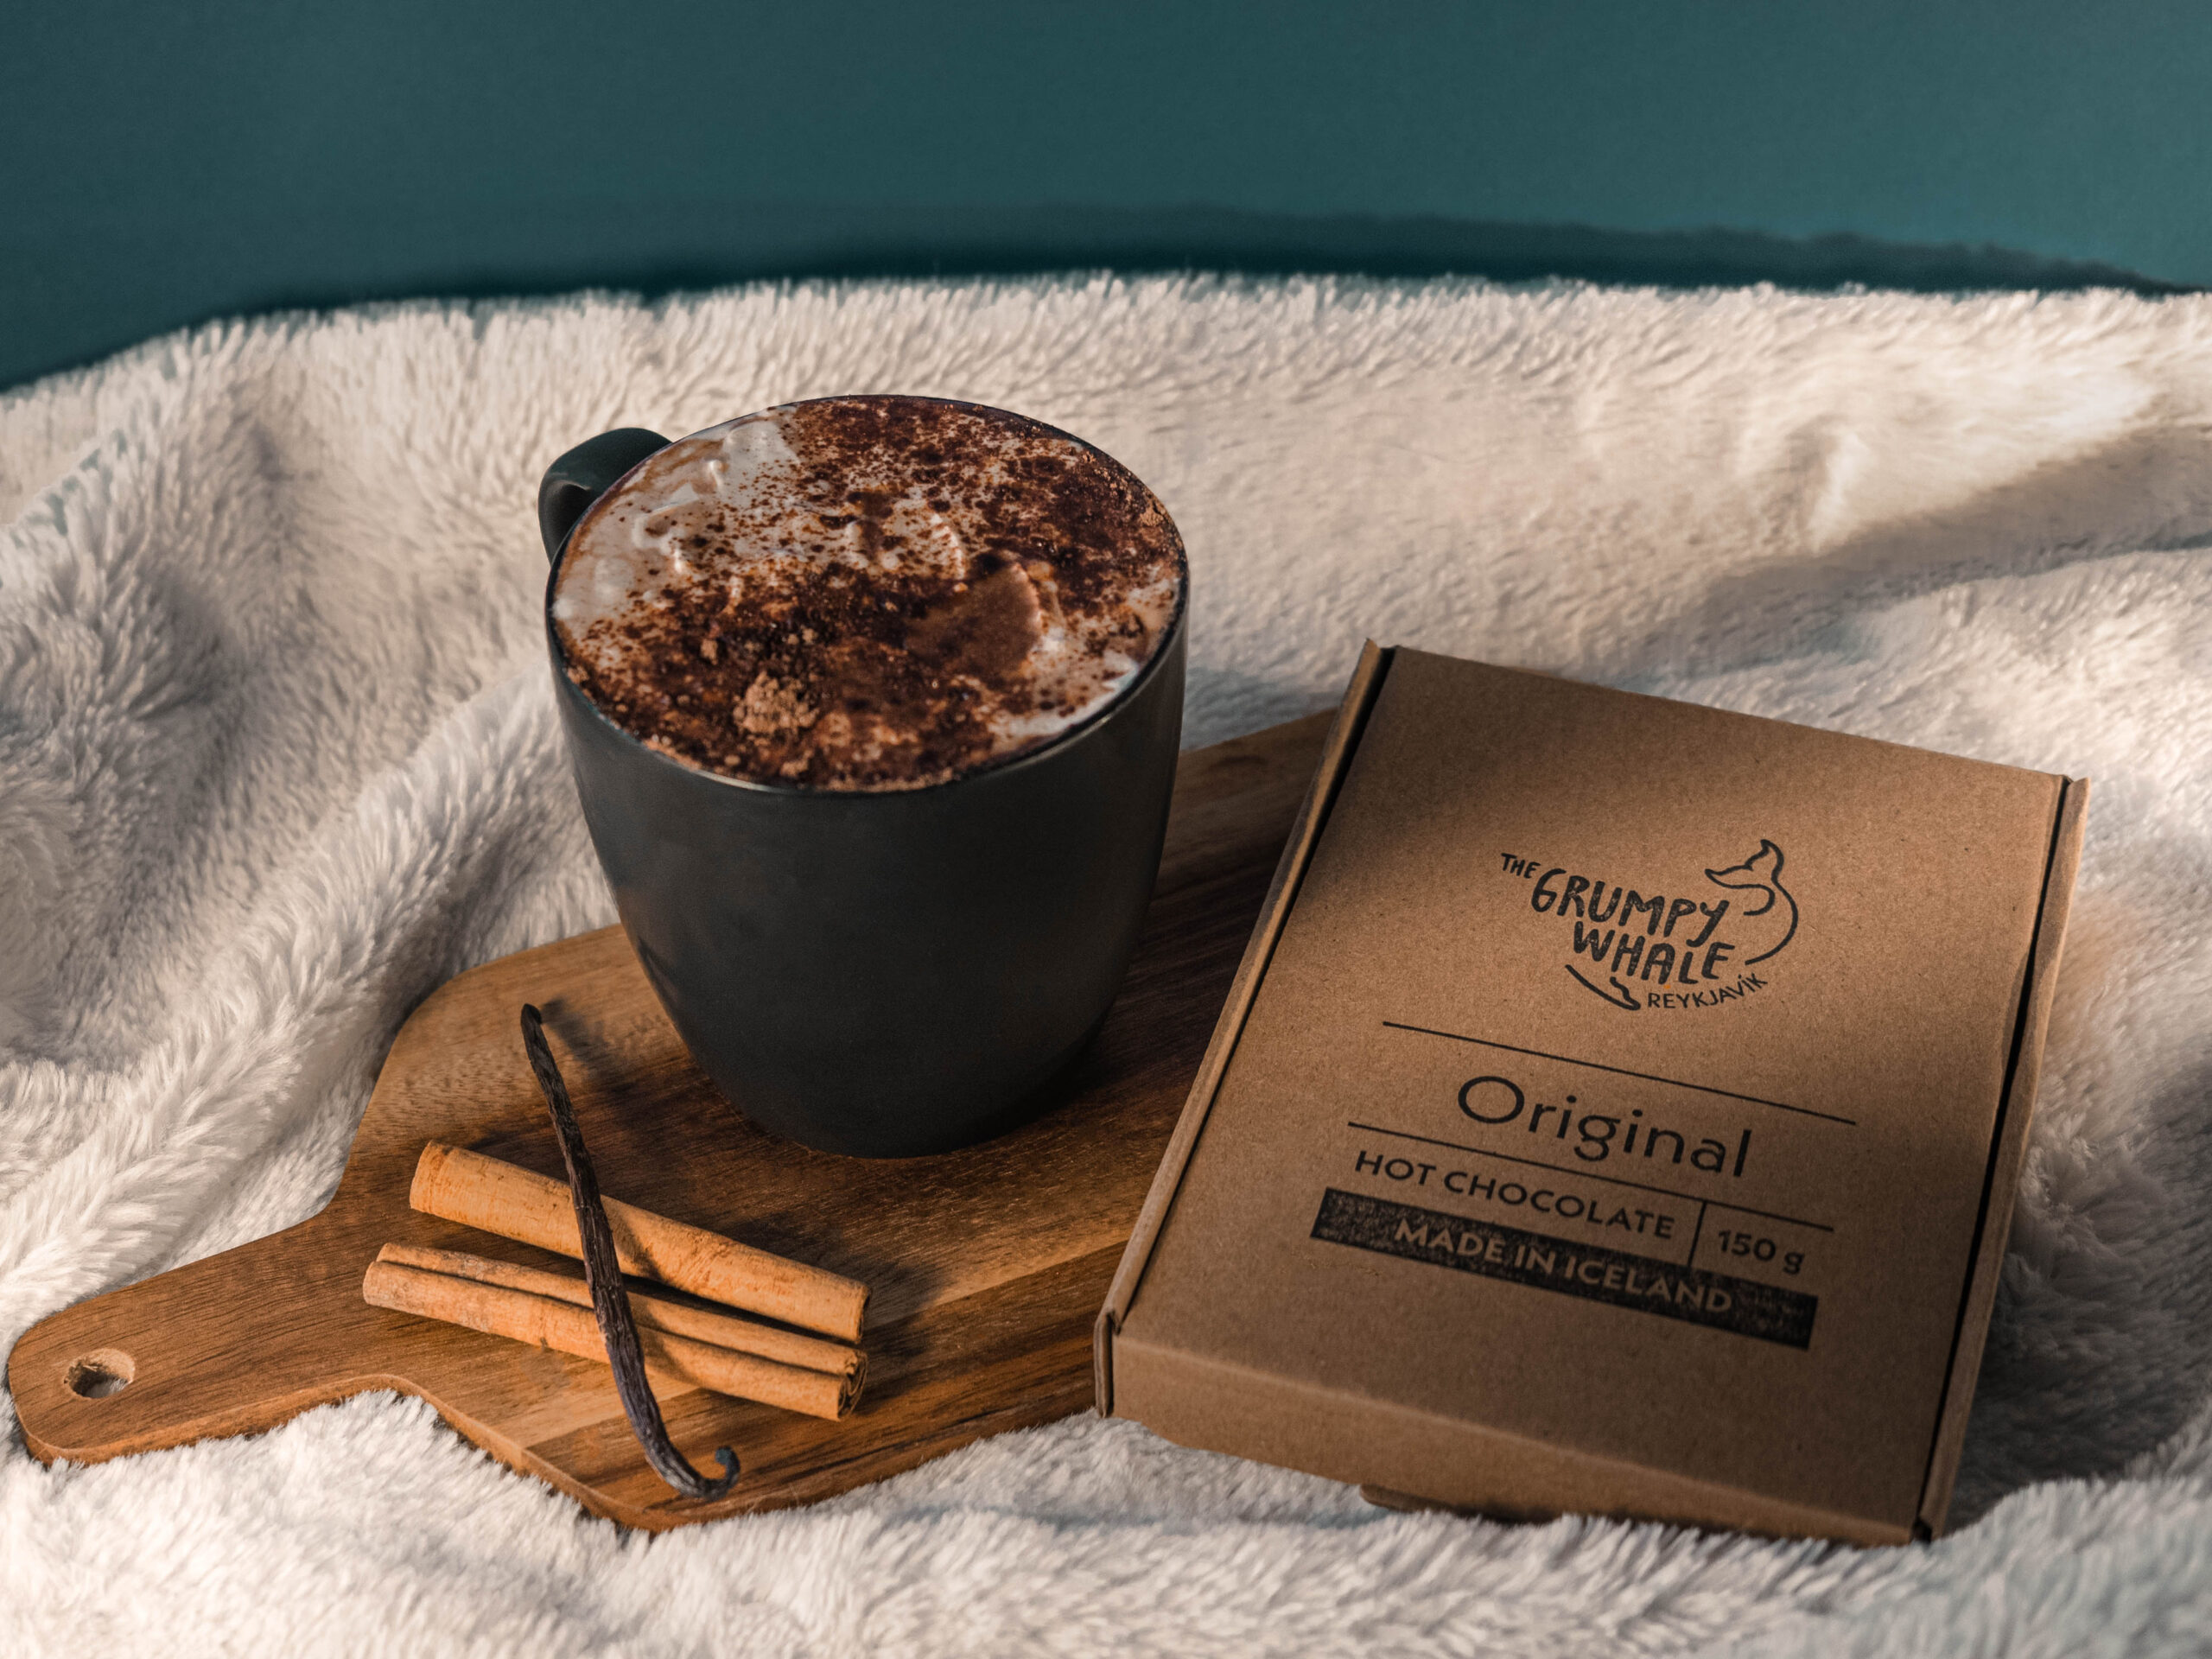 The Grumpy Whale Original Hot Chocolate has notes or vanilla and cinnamon. This serving suggestion with oat milk, cream and cocoa dusting on a blanket displays how tasty and cosy our products can be.